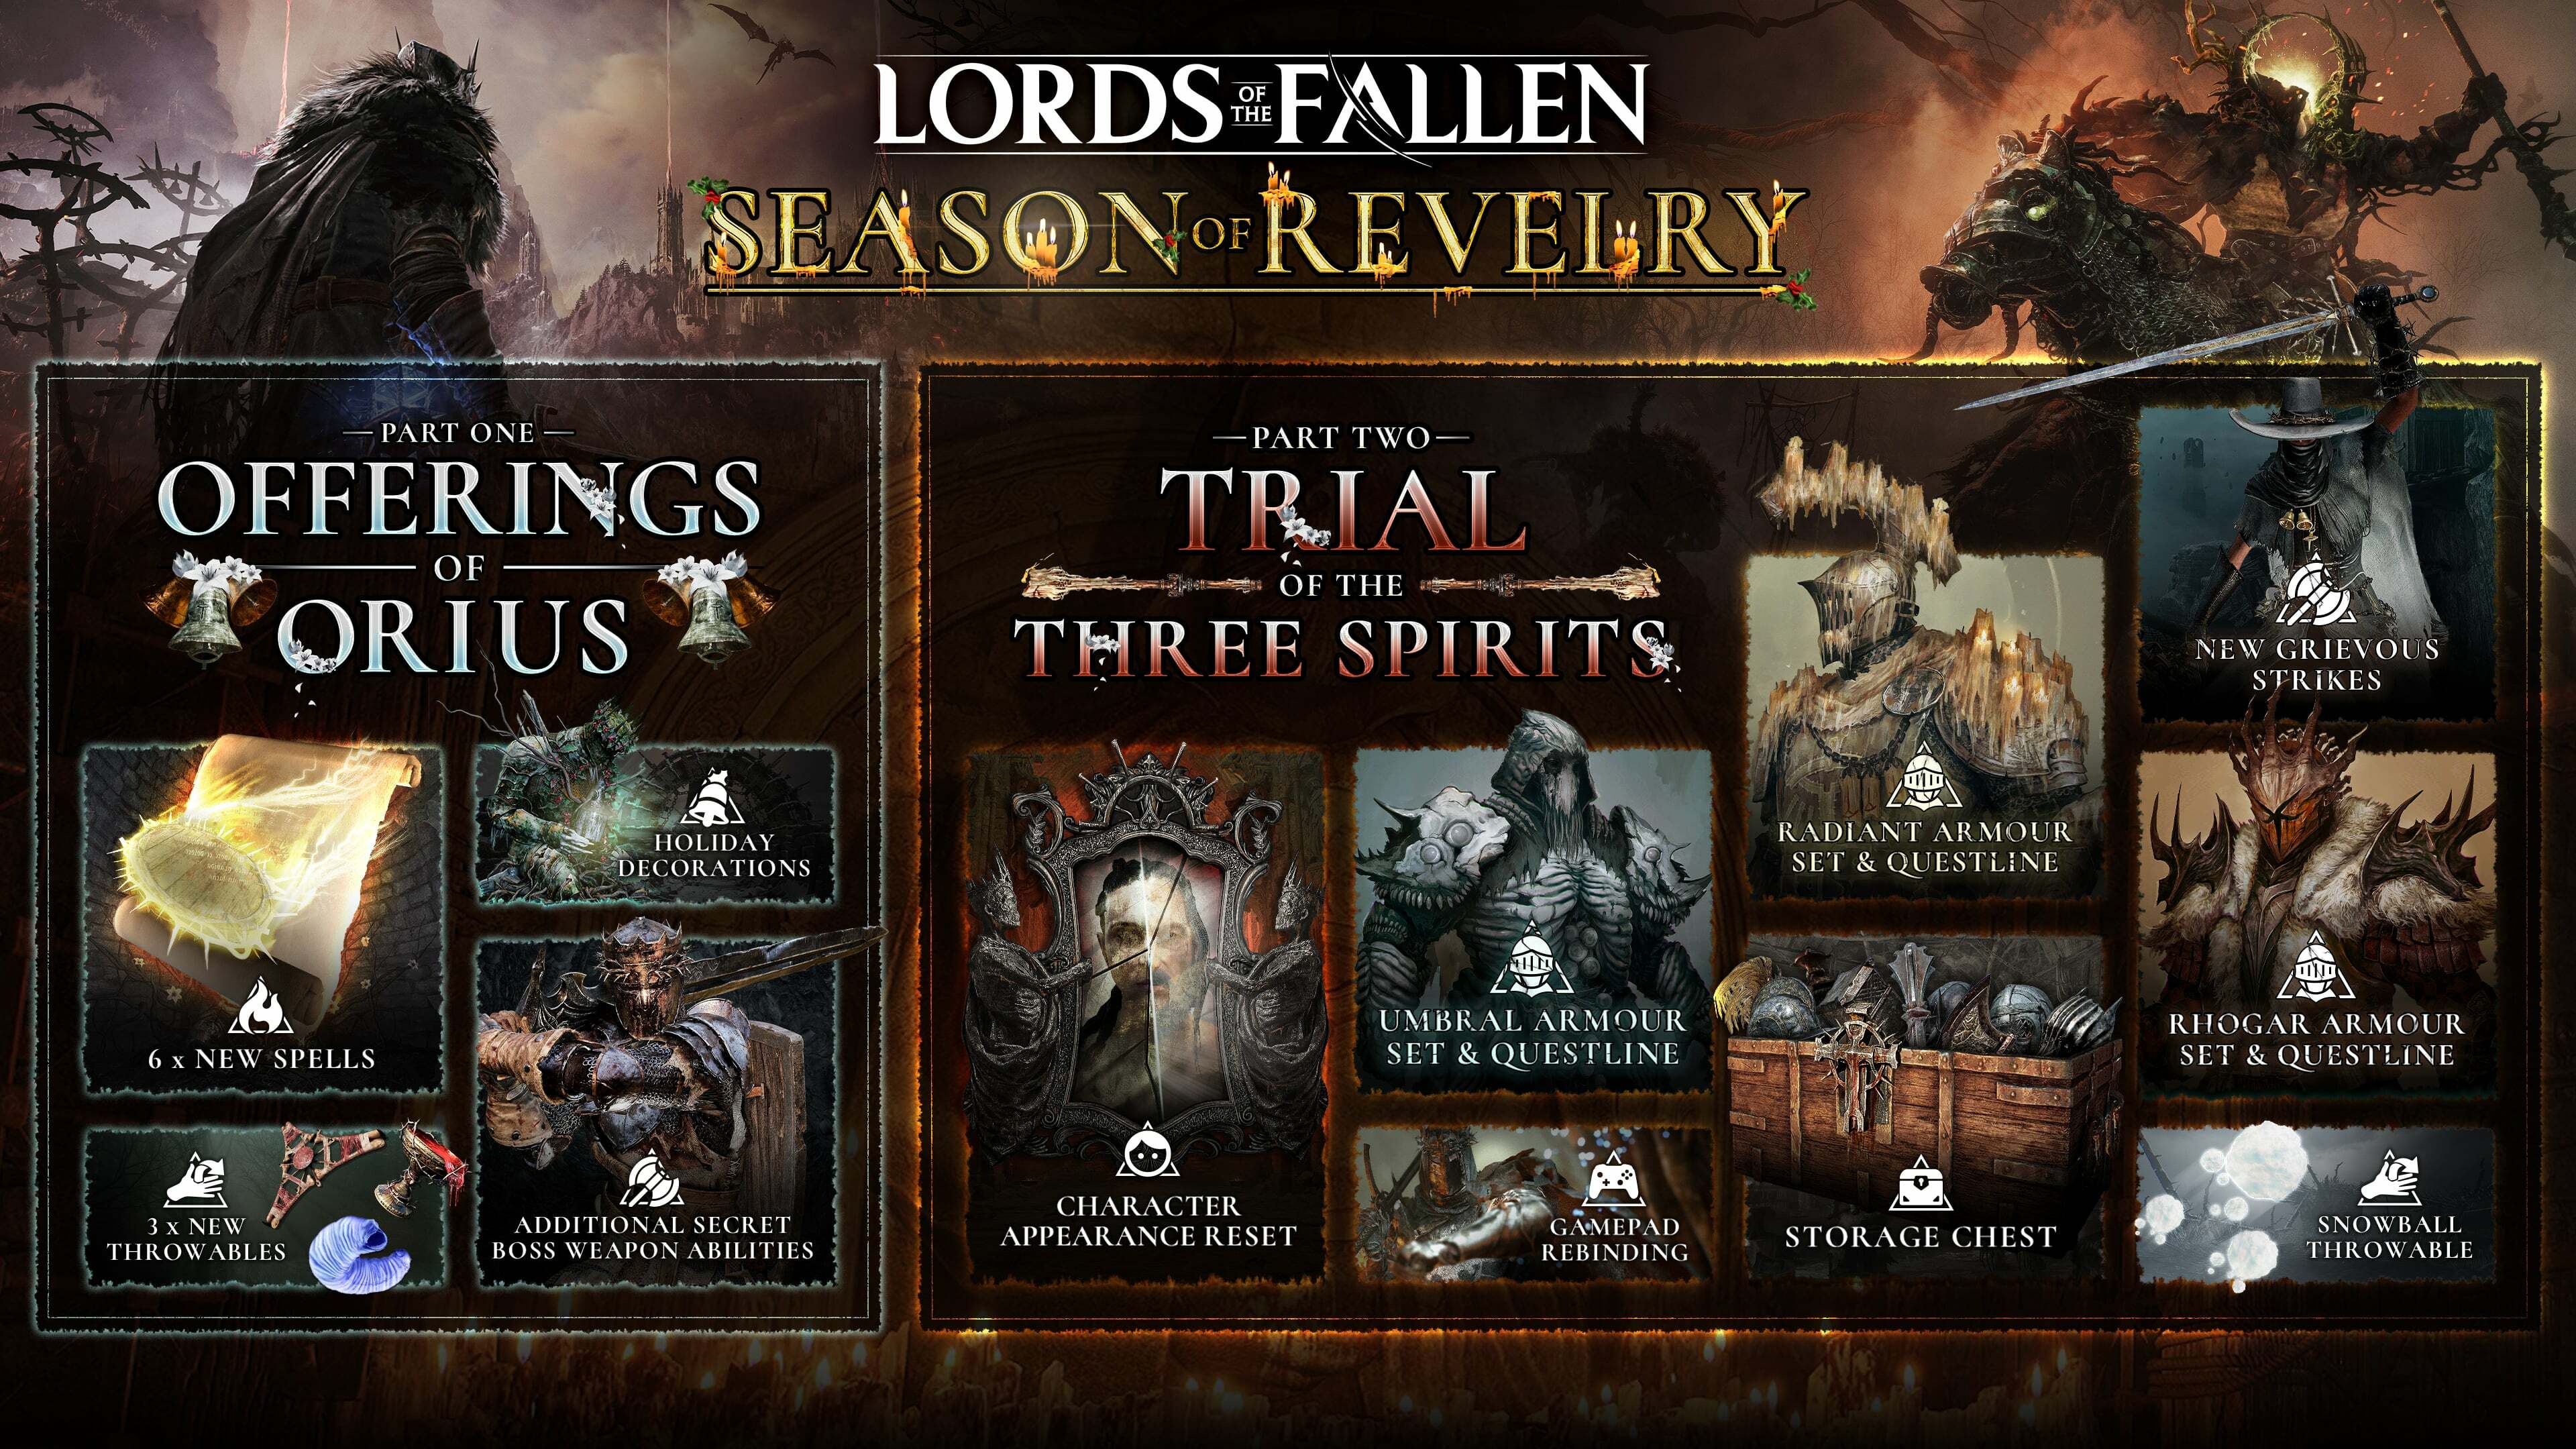 Lords of the Fallen update 1.1.243 patch notes: Performance